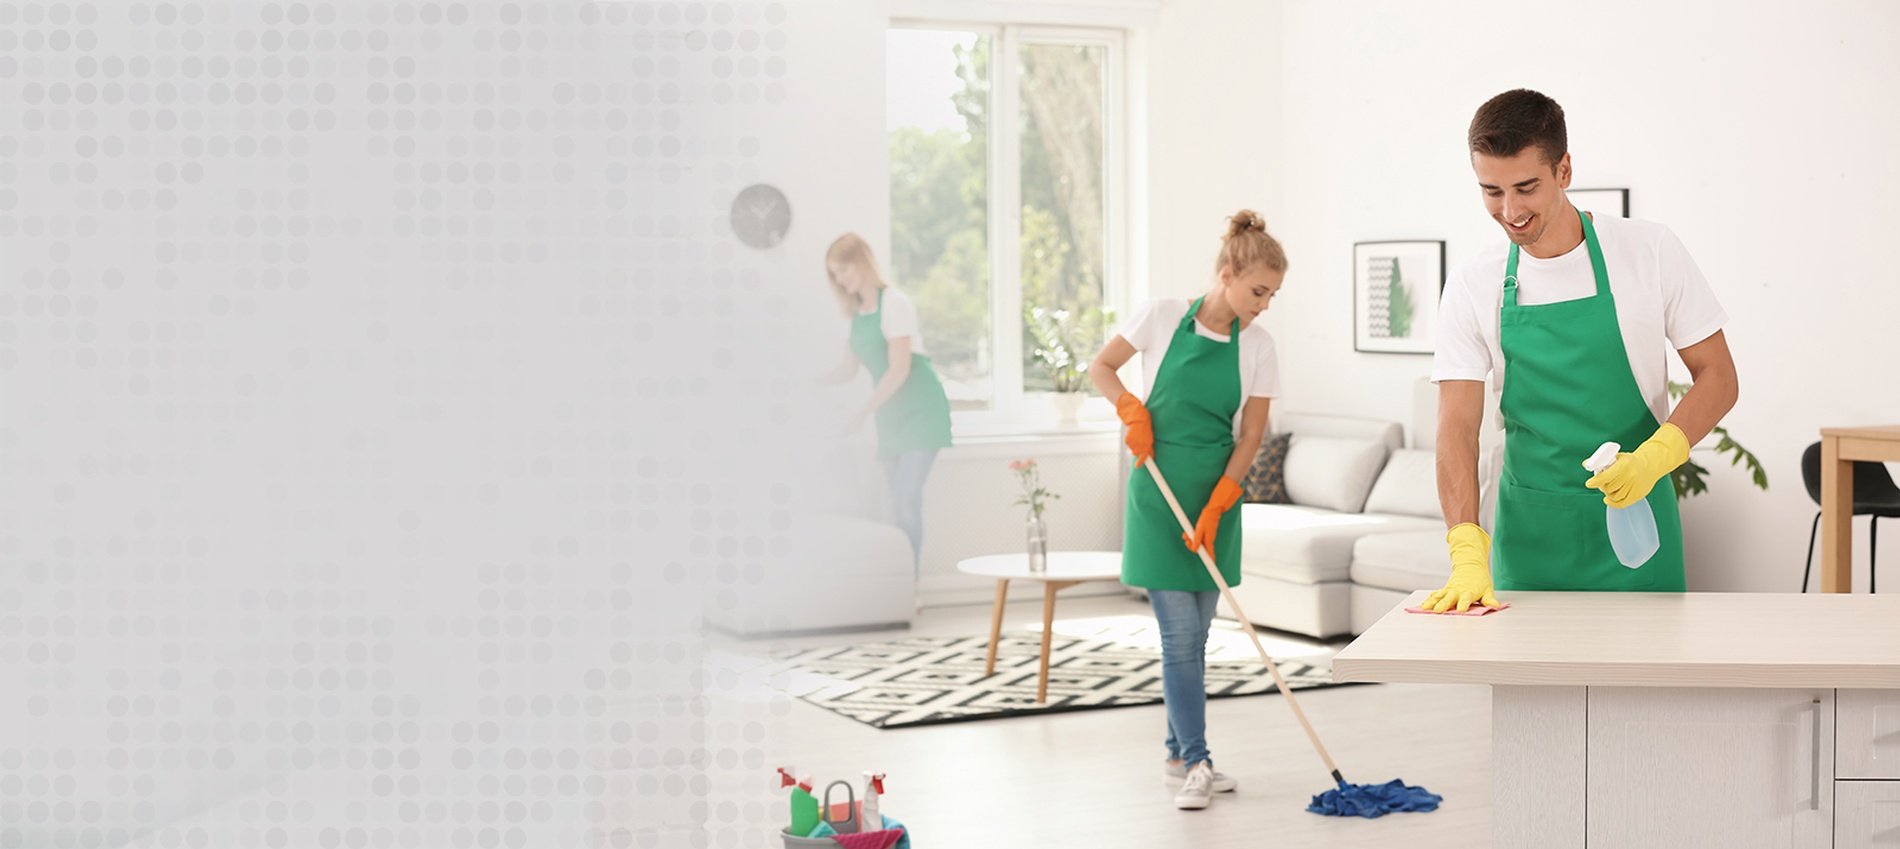 Our Muskegon Residential Cleaning Services ensures a clean and healthy environment for you and your loved ones